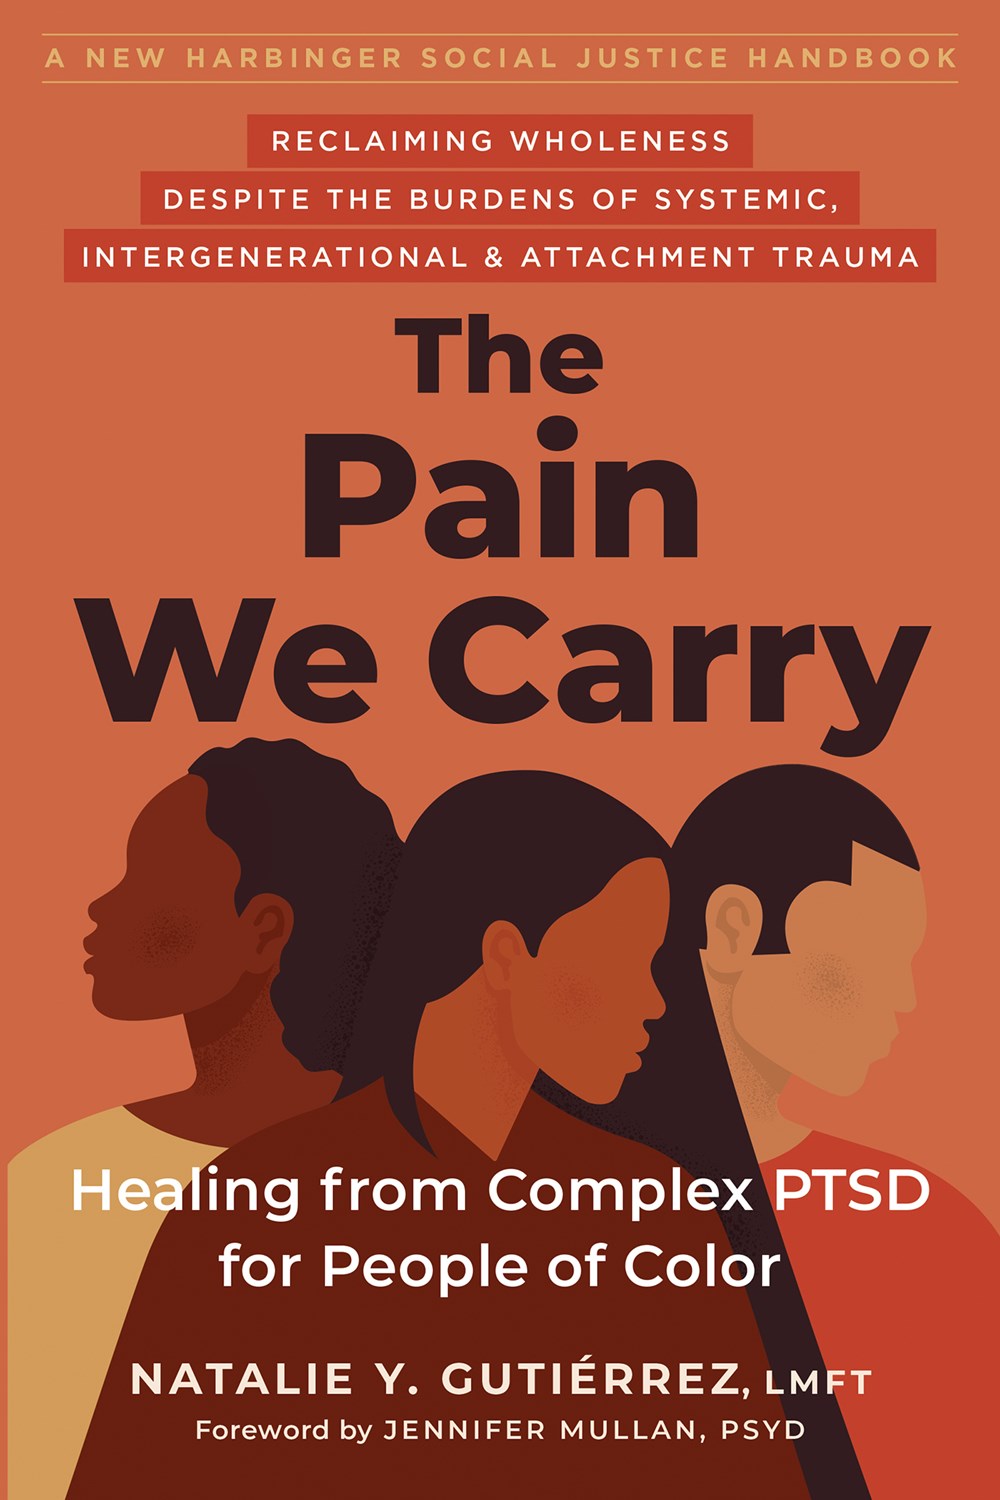 The Pain We Carry: Healing from Complex PTSD for People of Color by Natalie Y. Gutiérrez